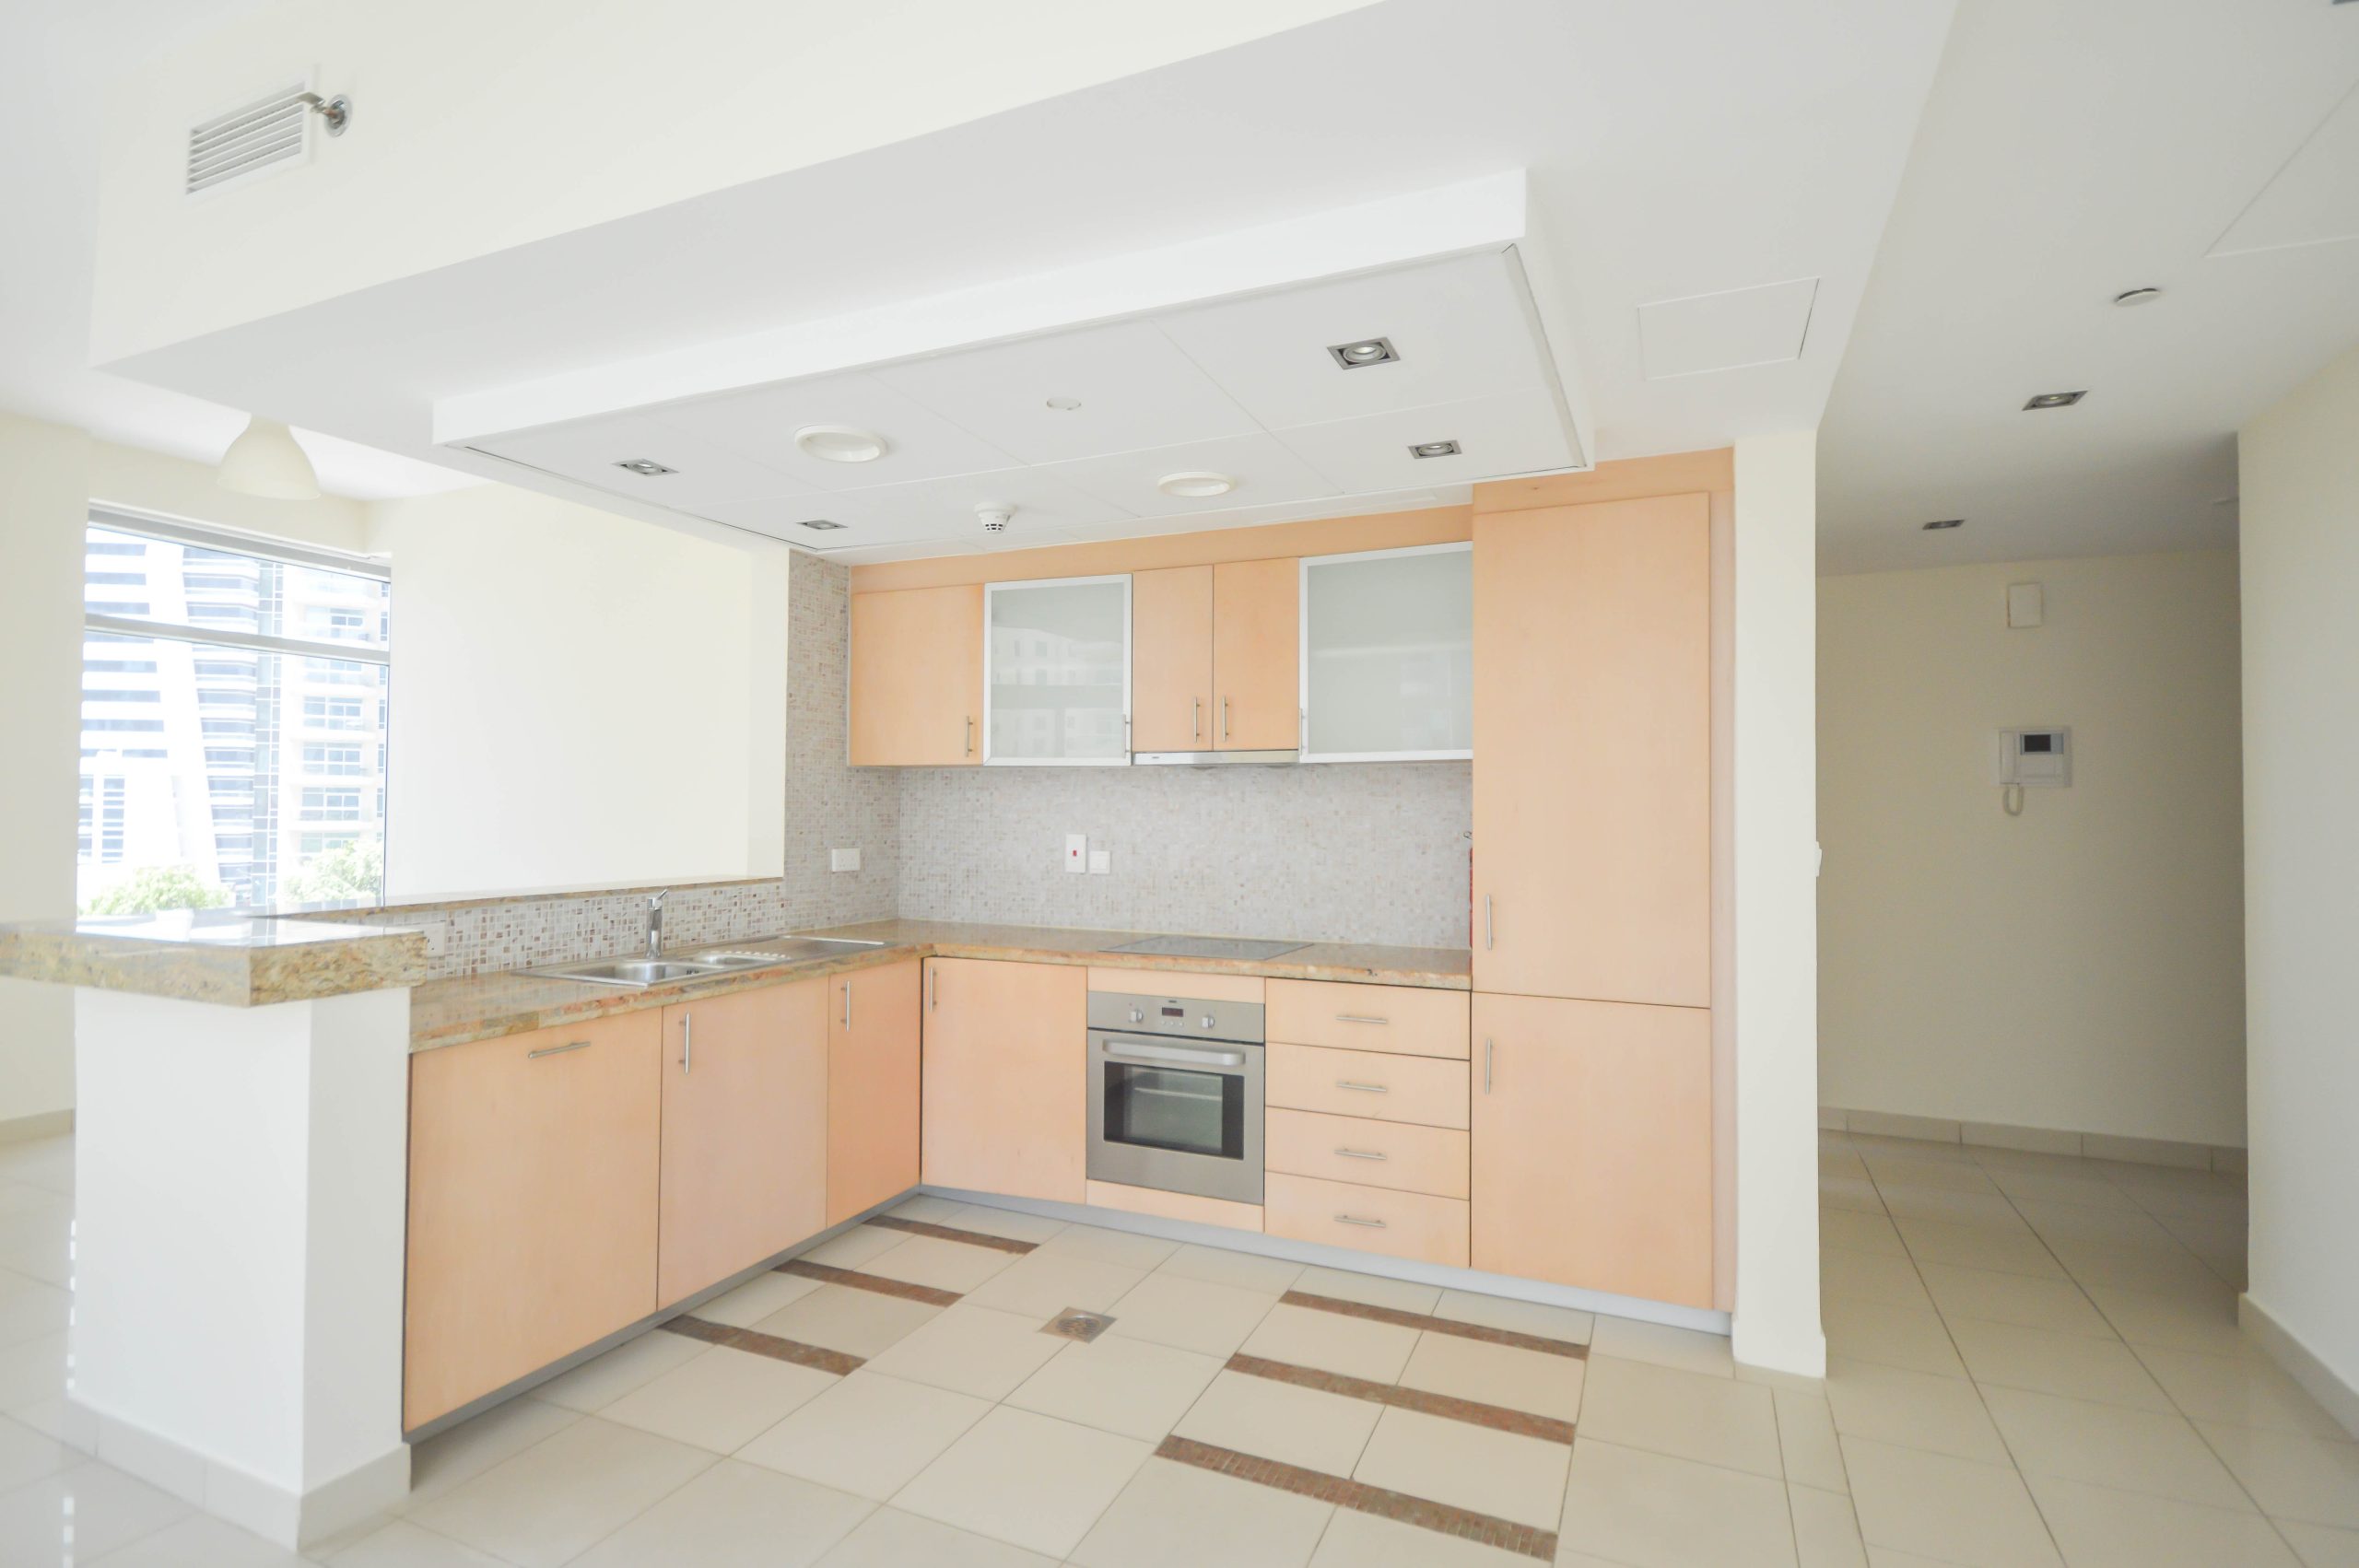 Motivated Seller | Modified kitchen | Fairfiled